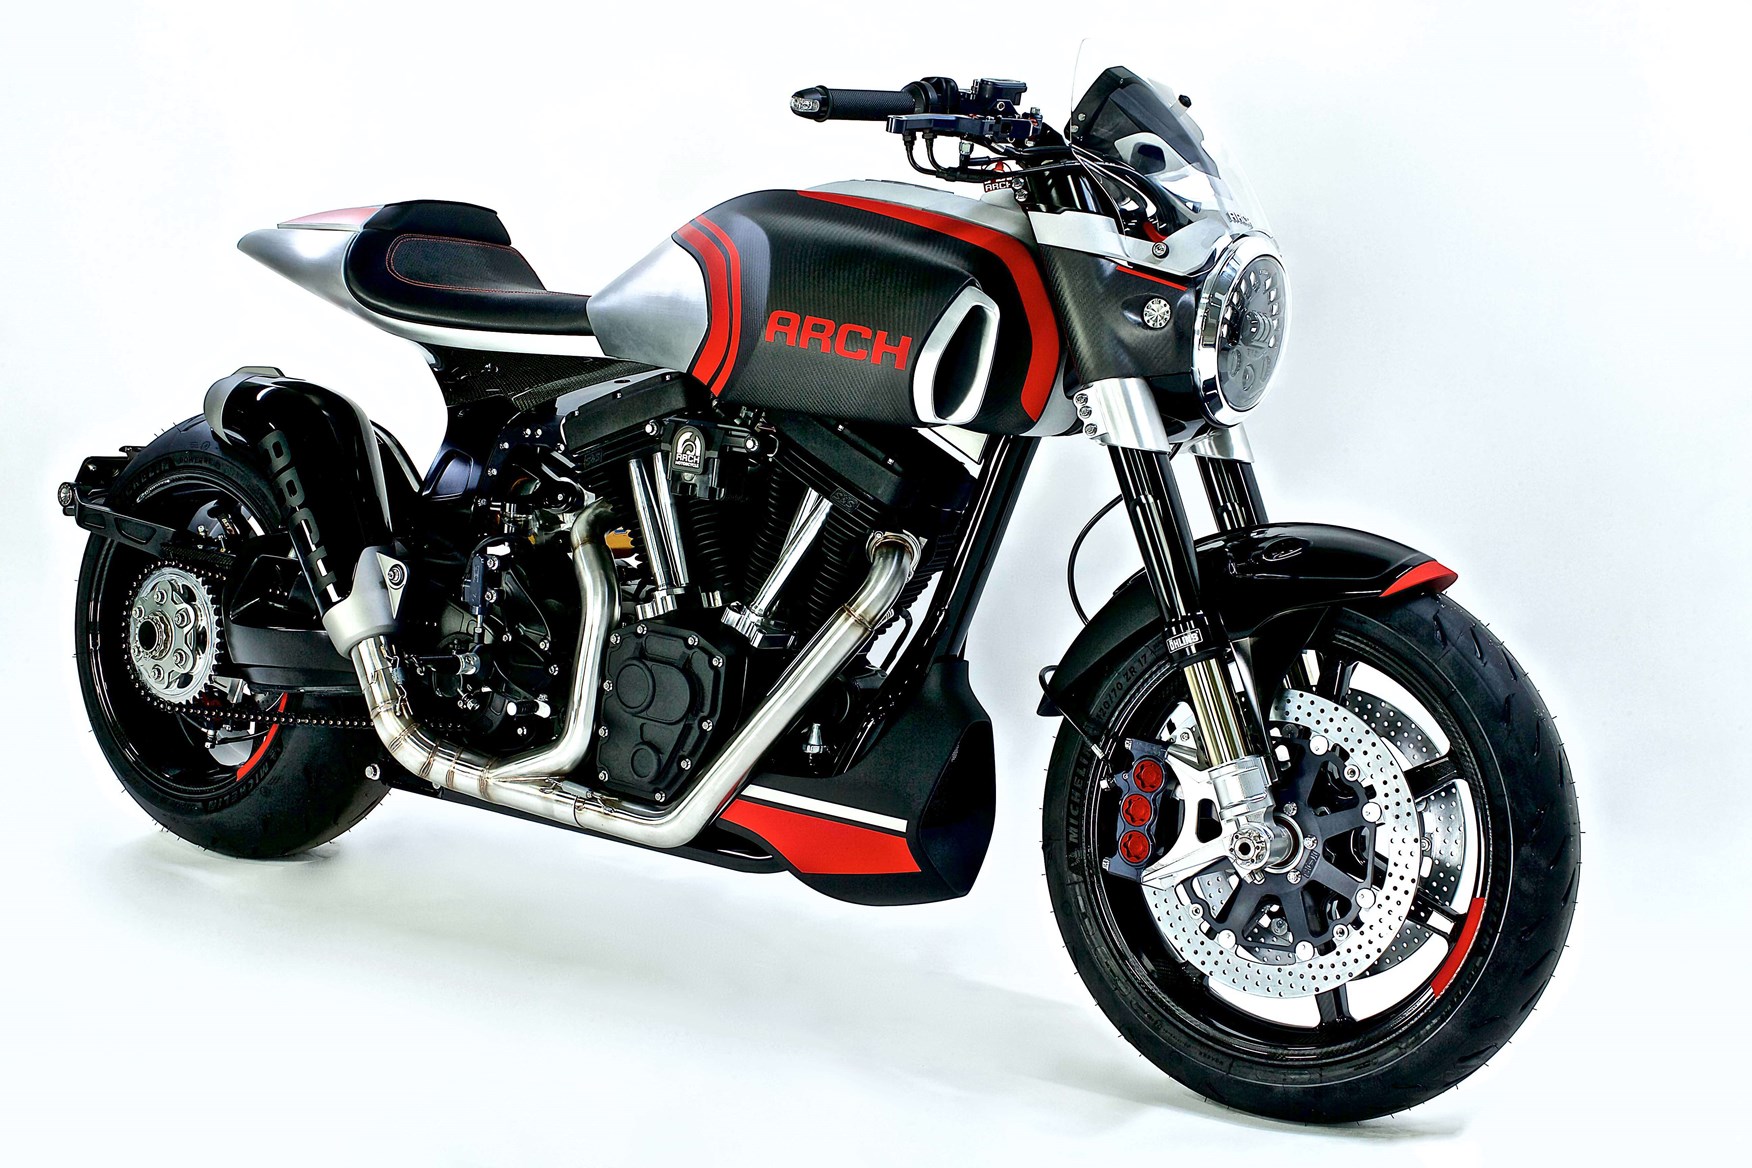 Arch Motorcycles reveal two new models1752 x 1168